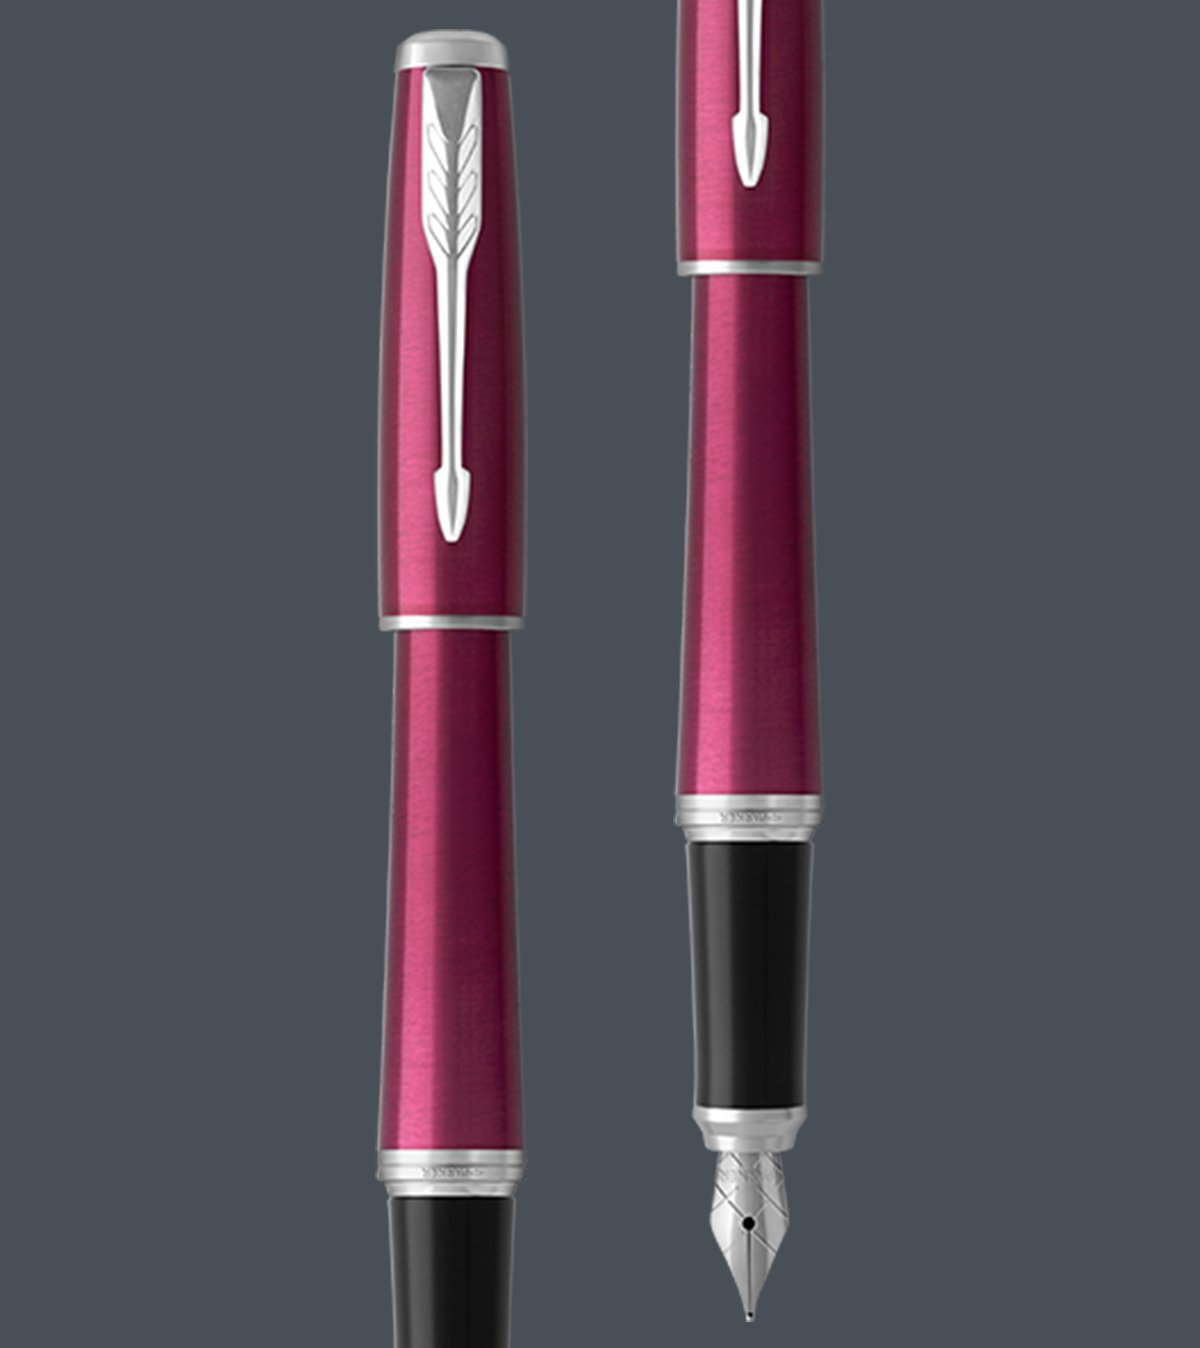 Two upright Urban fountain pens with chrome trim.